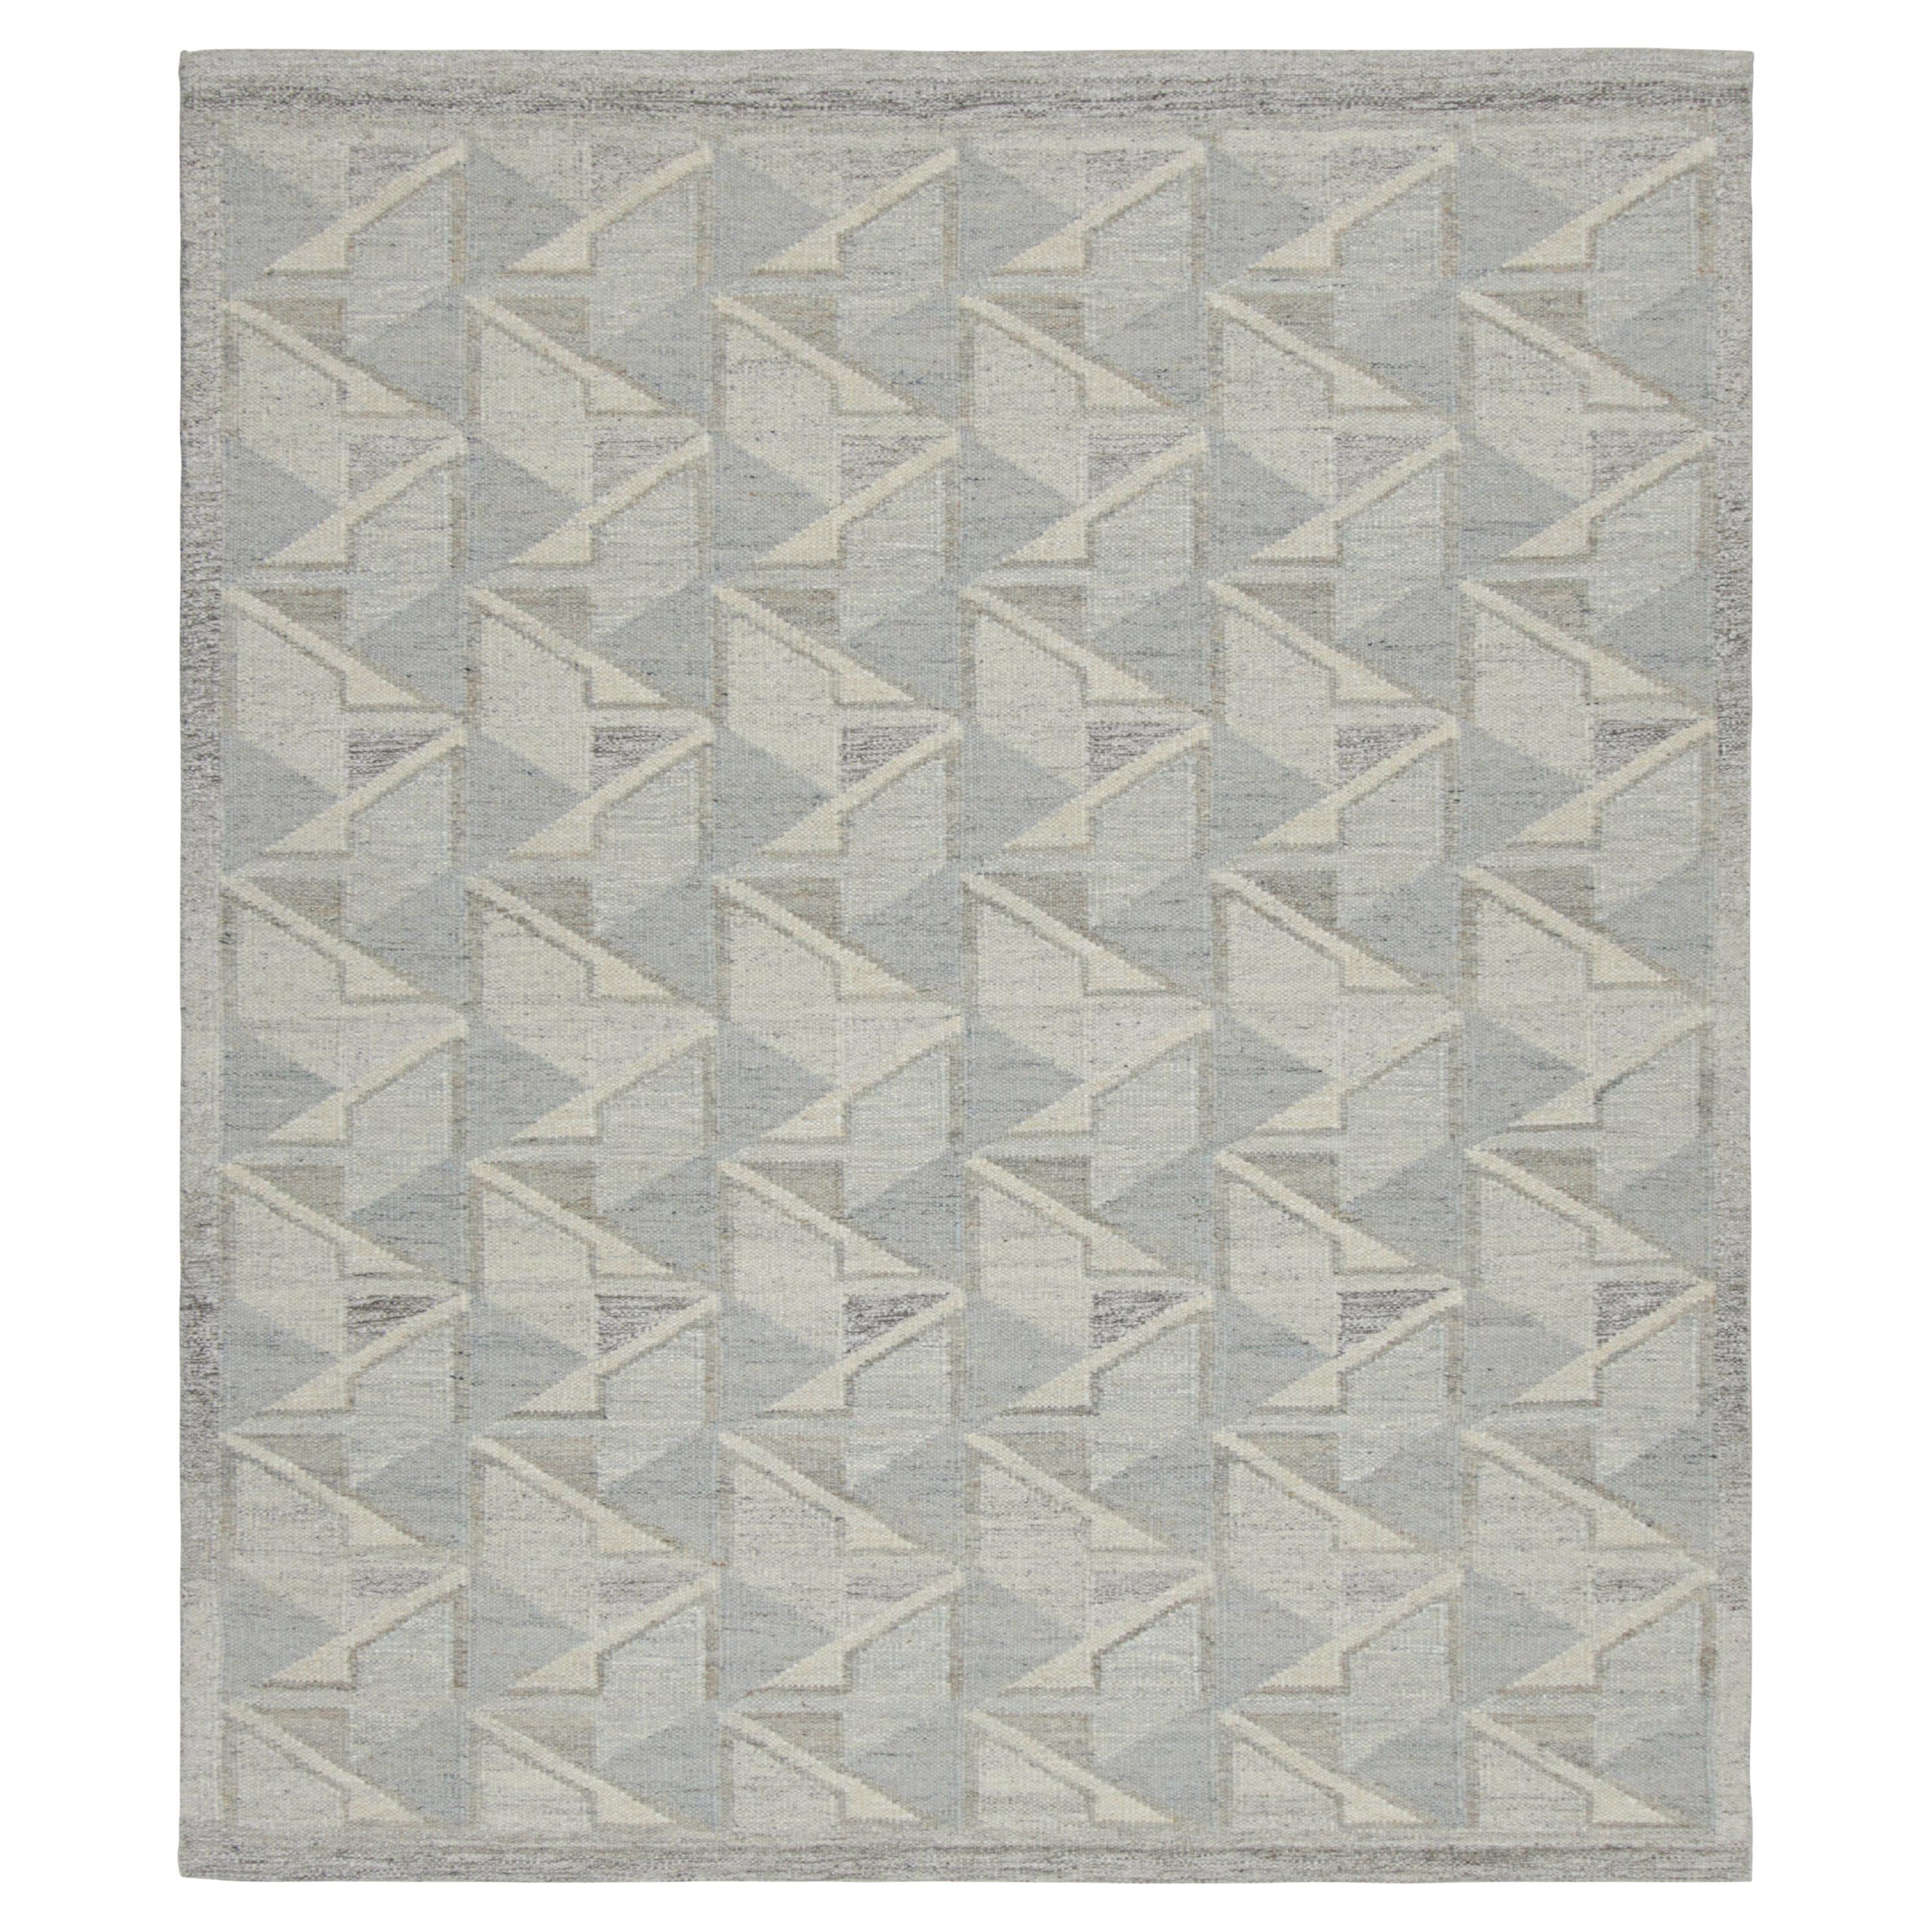 Rug & Kilim’s Scandinavian Style Rug in Blue with Gray-White Geometric Patterns For Sale